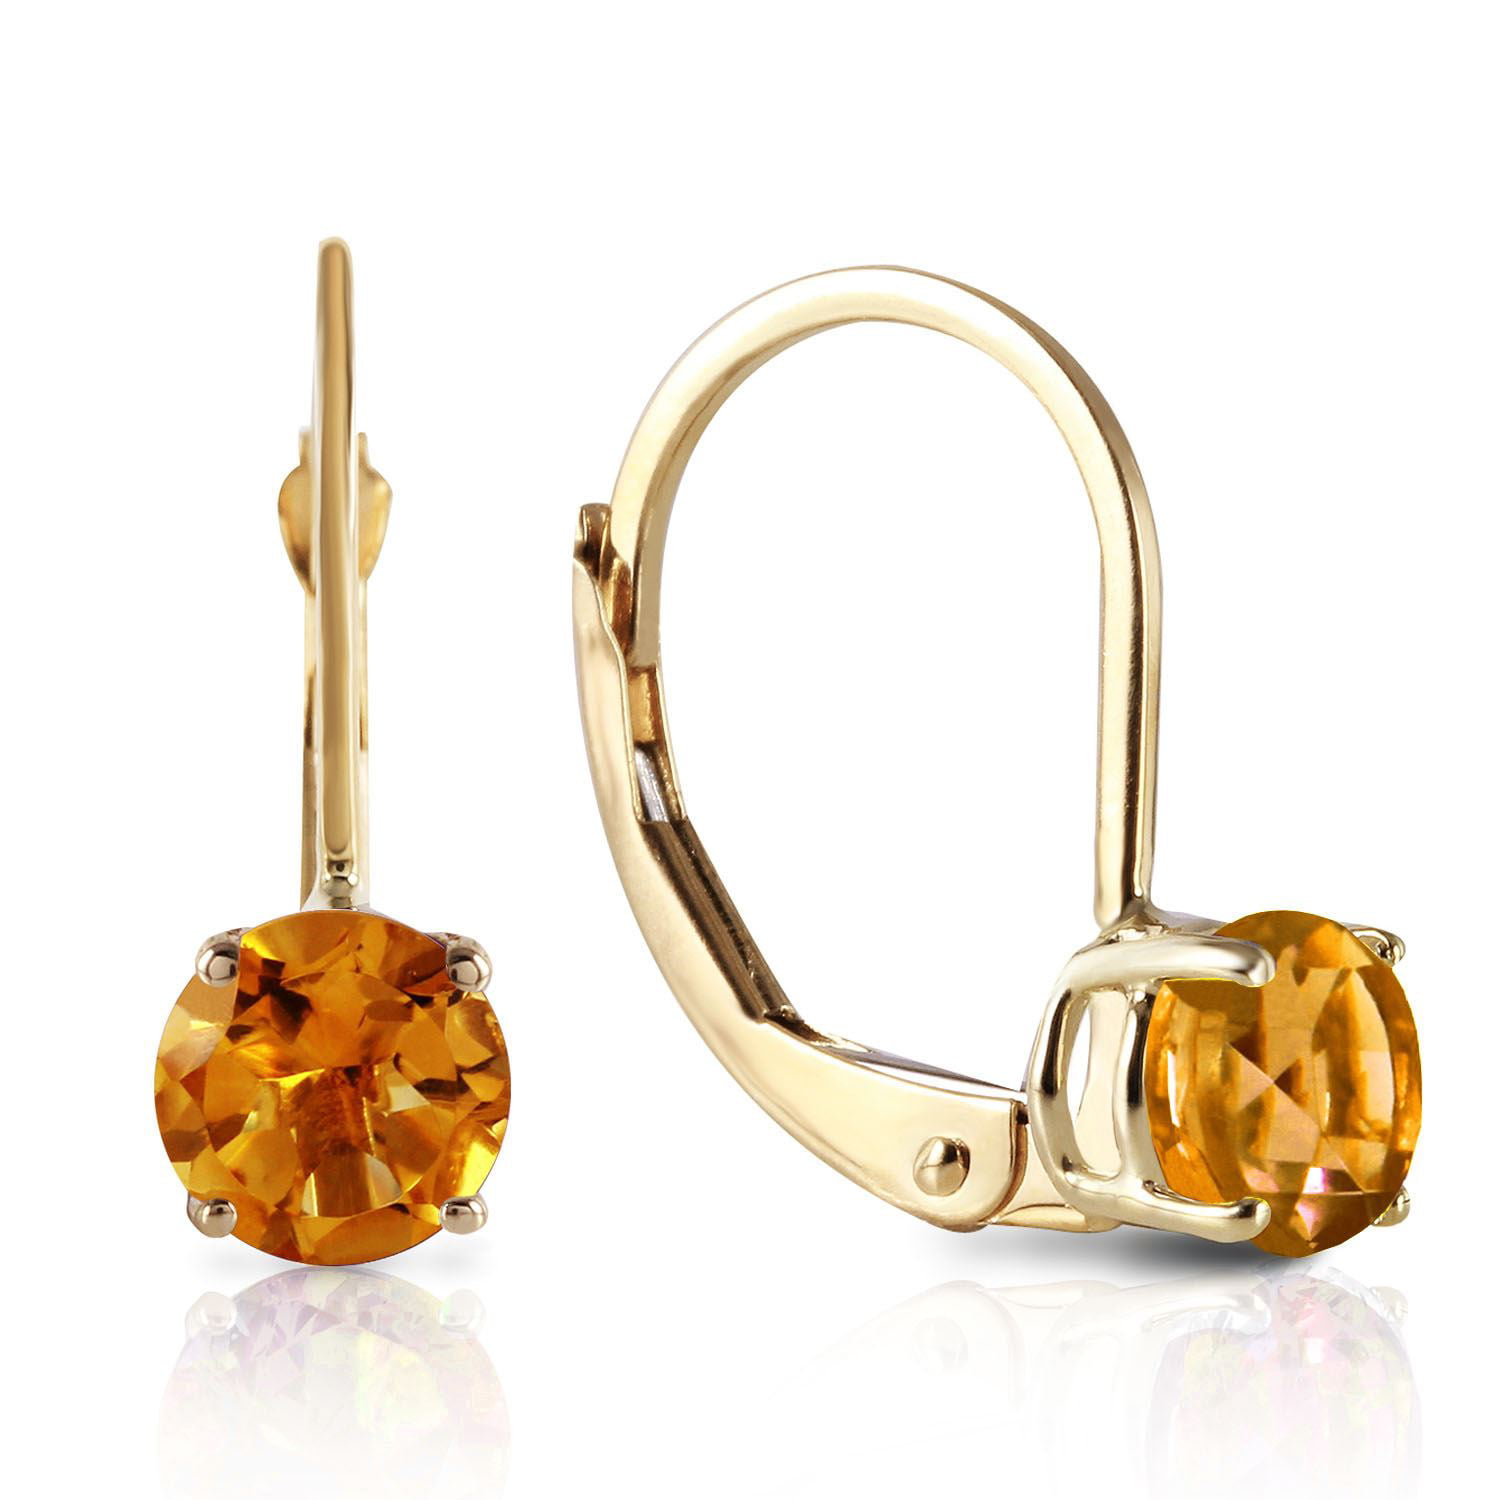 Details about   1.2 Carat 14K Solid Gold Iris Citrine Earrings